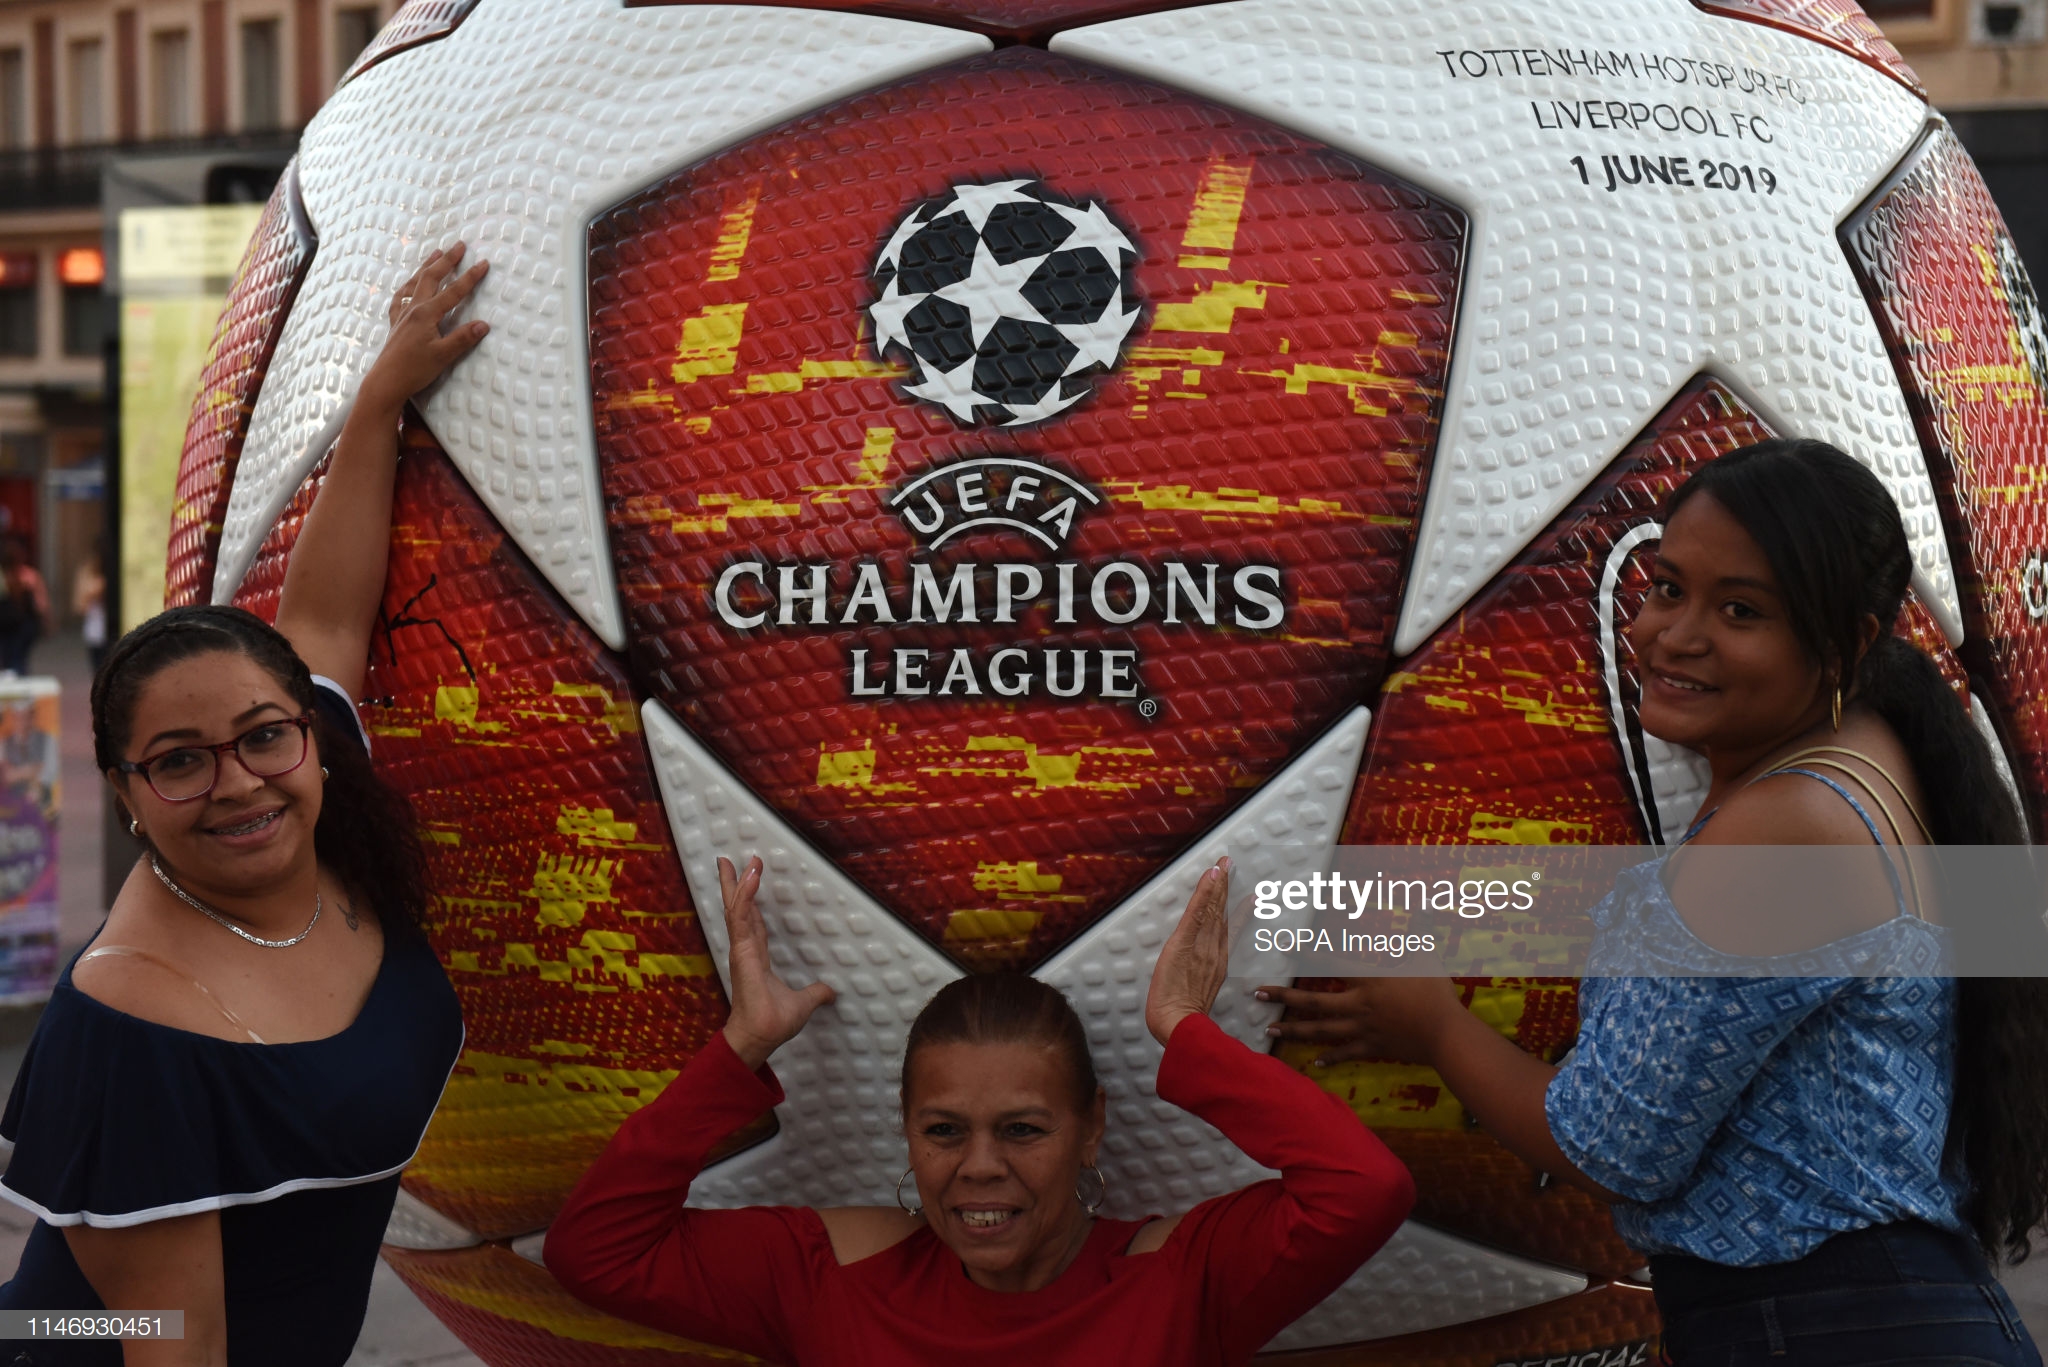 gettyimages-1146930451-2048x2048.jpg